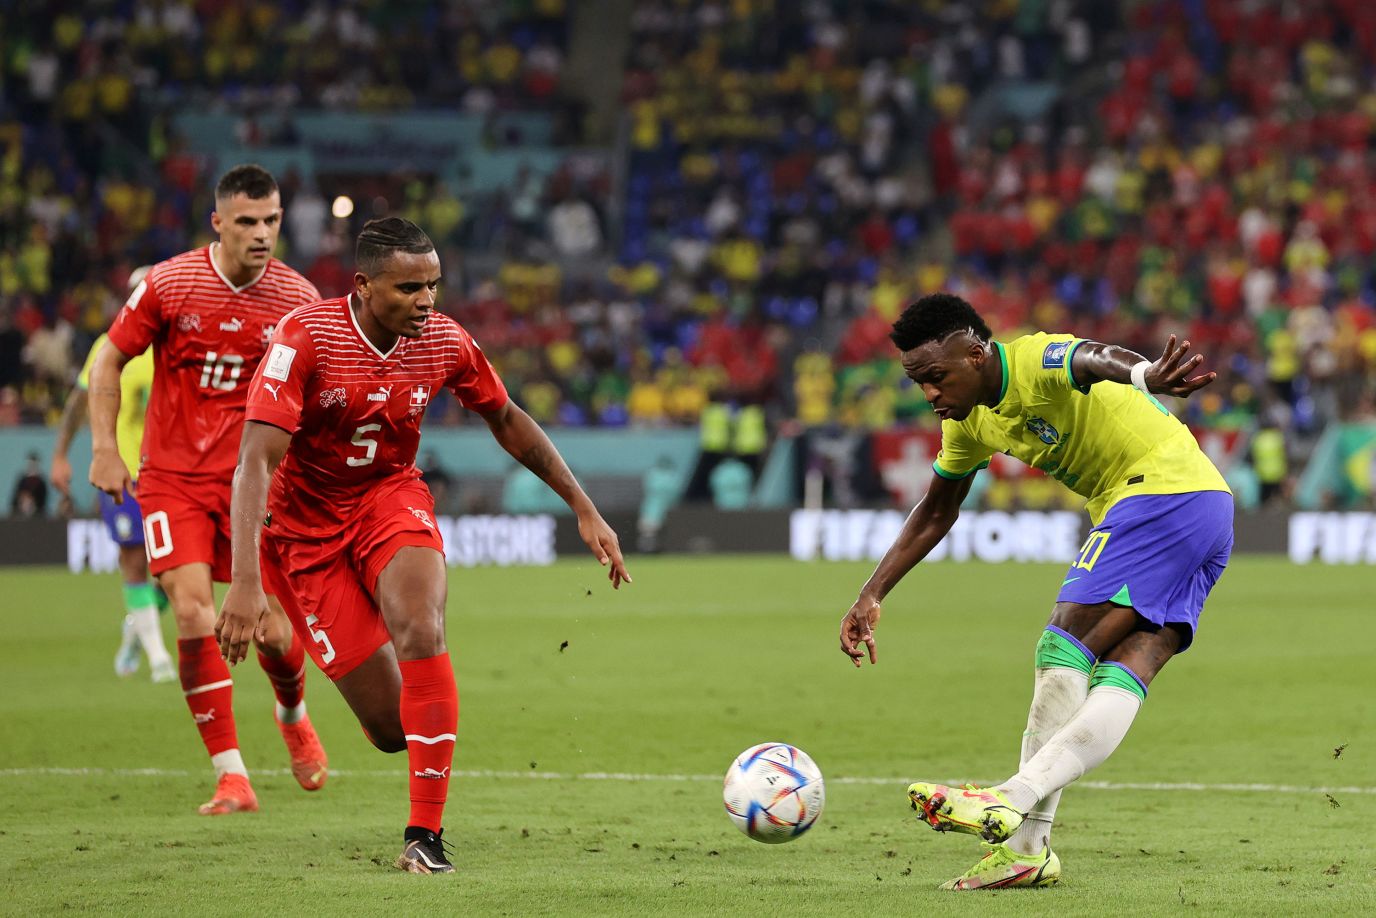 Brazil's Vinícius Júnior performs a rabona during his team's 1-0 victory over Switzerland on Monday. The Brazilians' win ensured that they will be advancing from their group.